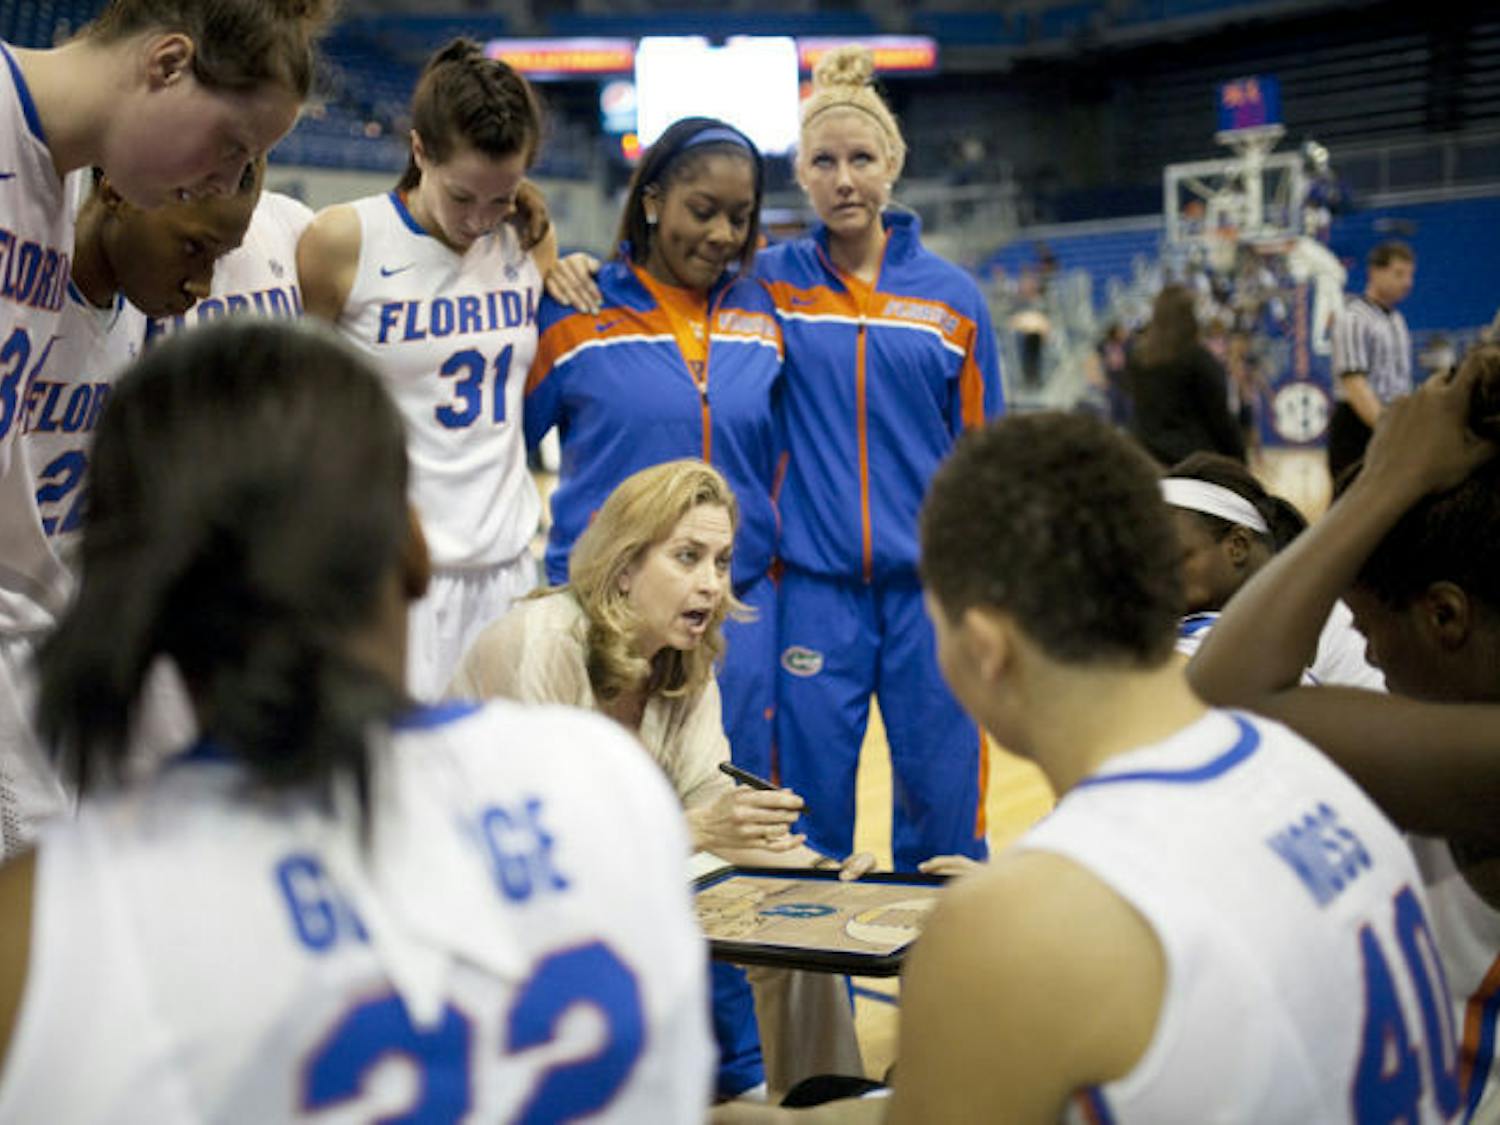 Coach Amanda Butler draws up a play during a timeout in Florida’s 88-81 loss to Ole Miss on Jan. 24 in the O’Connell Center. UF’s loss to Missouri on Thursday was its fifth straight defeat.
